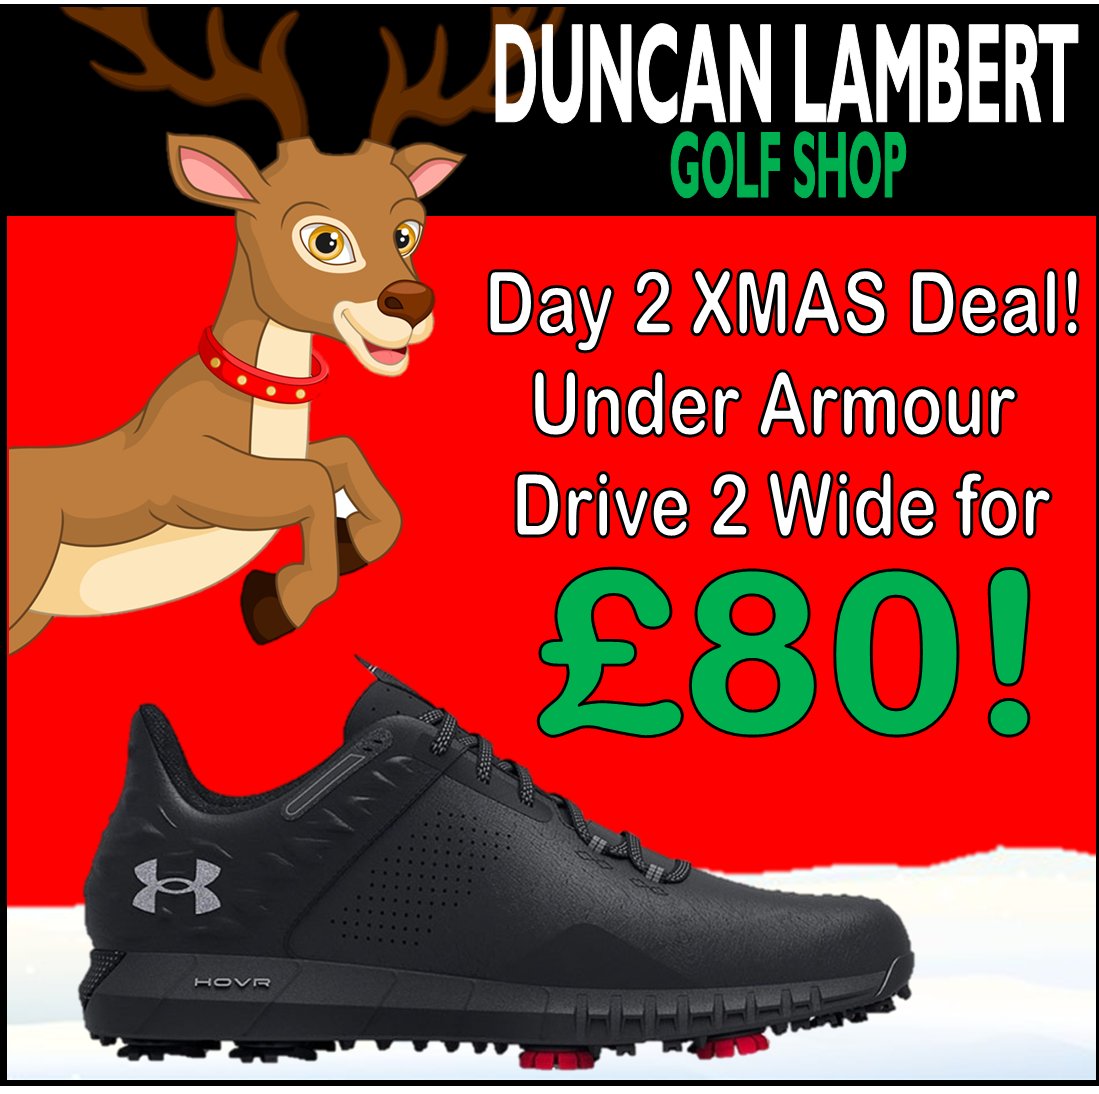 24 DAYS OF CHRISTMAS!!! ⛄ Day 2 brings a great offer on the Under Armour Drive 2 Wide men's golf shoes, which come with a 1 year waterproof guarantee too! ONE DAY ONLY! #golf #golfkent #golflife #golfproshops #golfxmas #golfgifts #underarmour #golfshoes #golfballs #golfengland